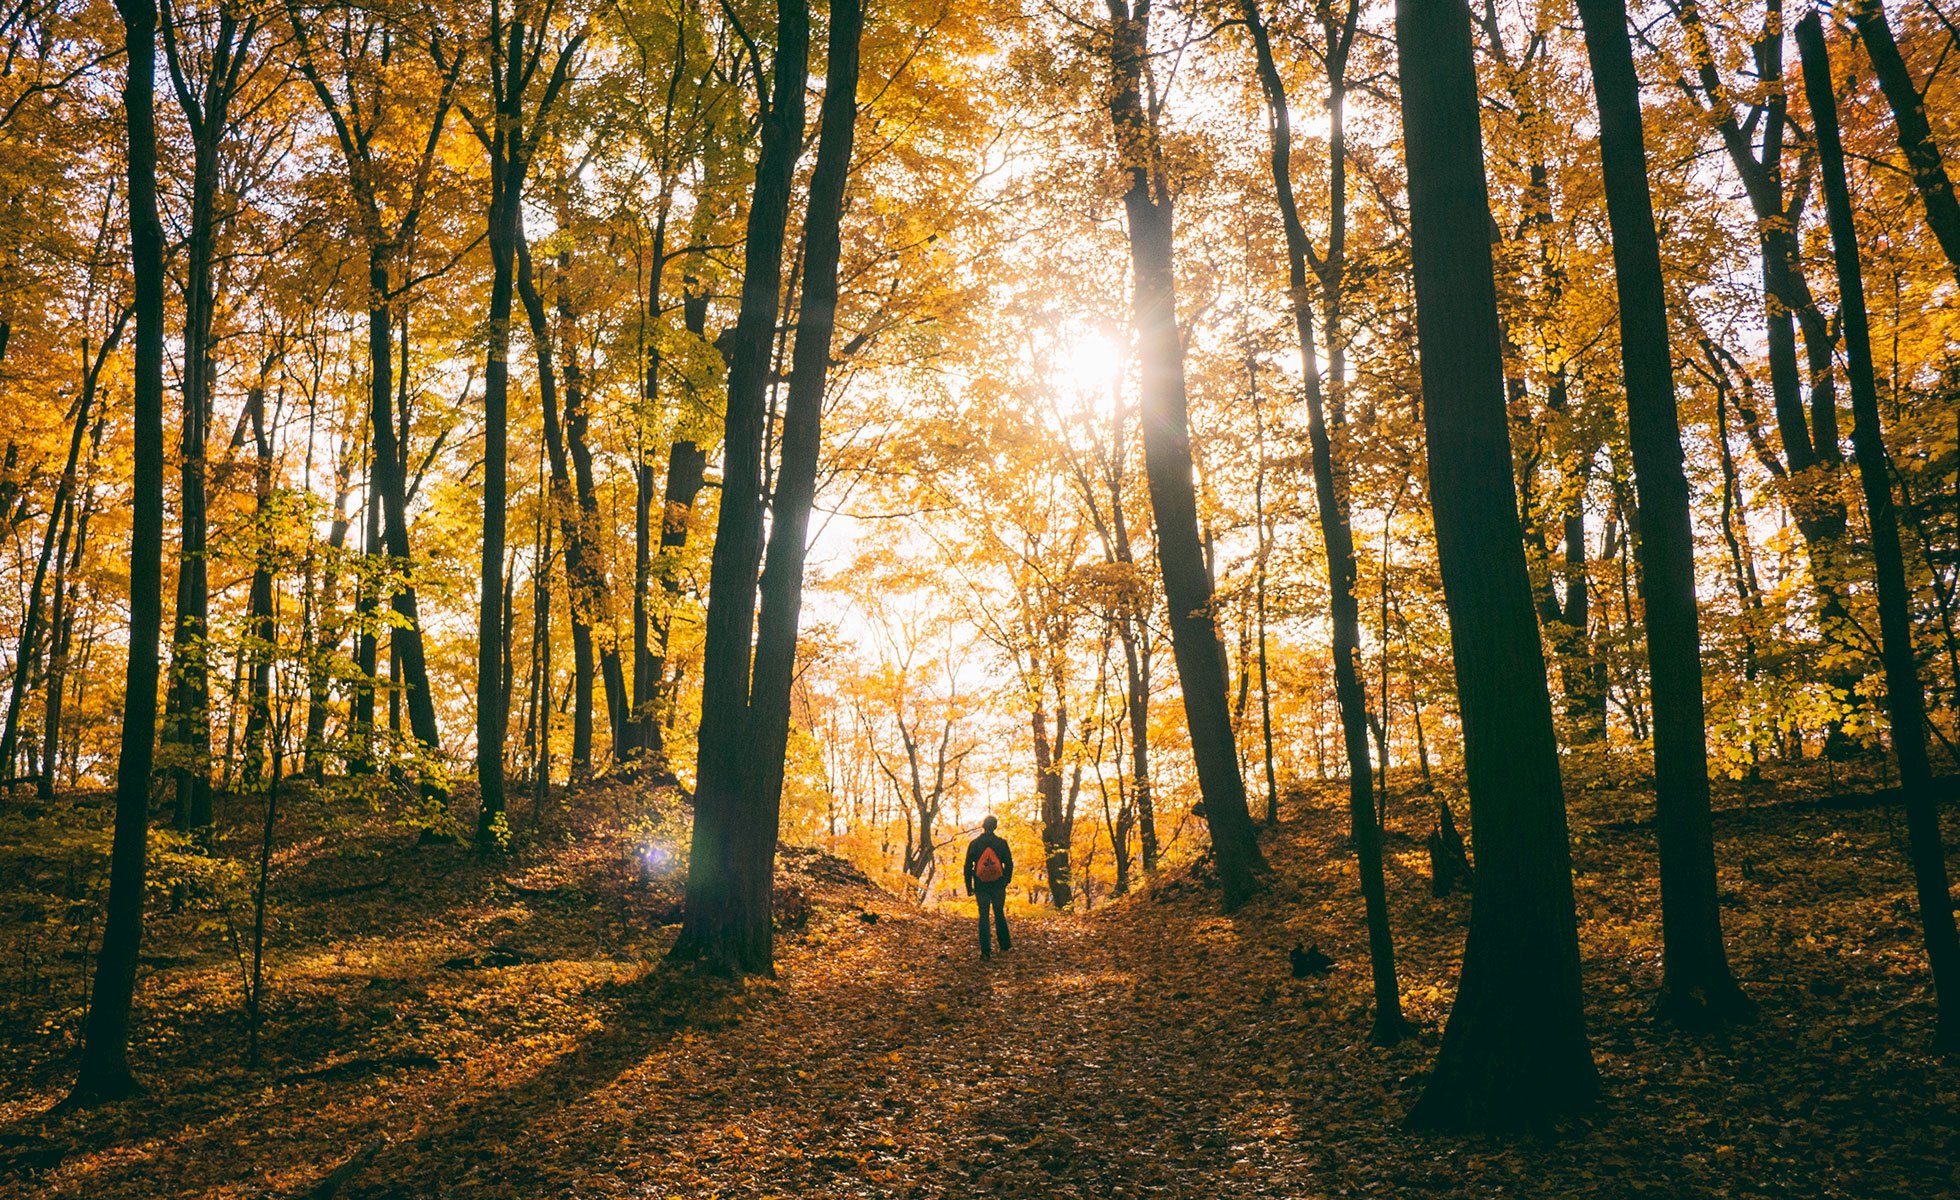 A person stands amidst a forest on an autumn day.